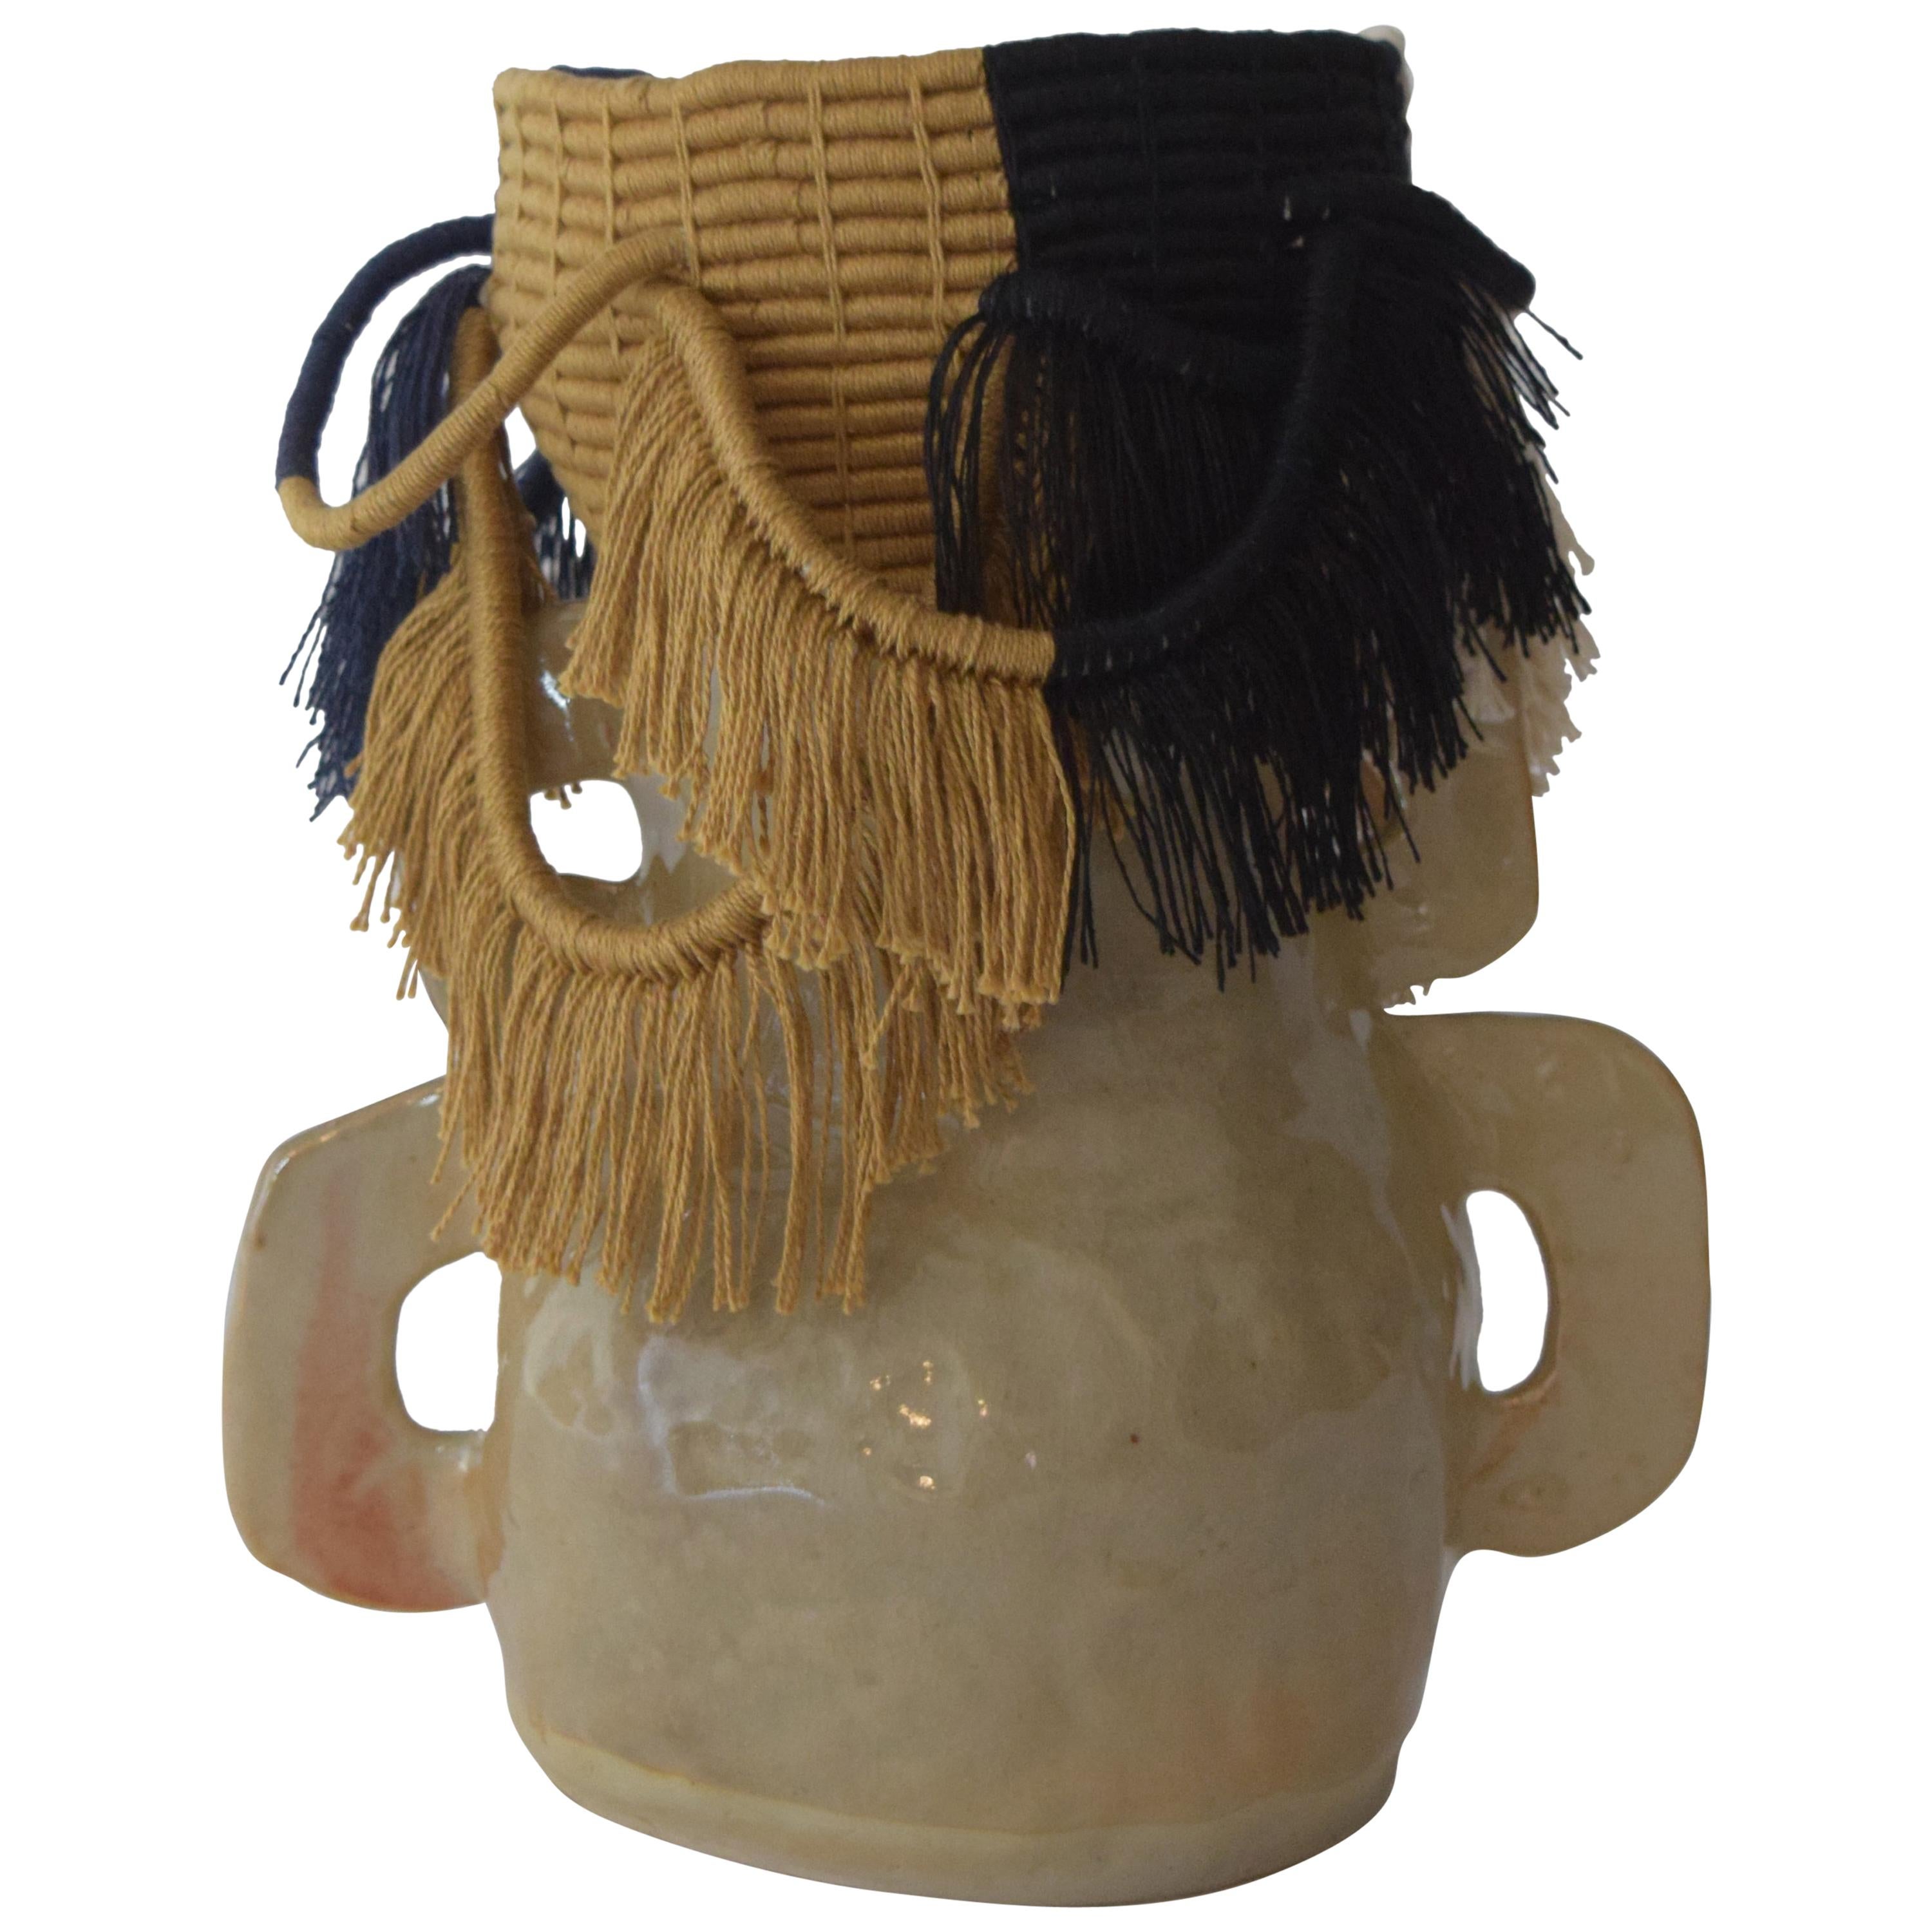 One of a Kind Ceramic and Woven Cotton Vessel in Natural, Gold, Black, Navy